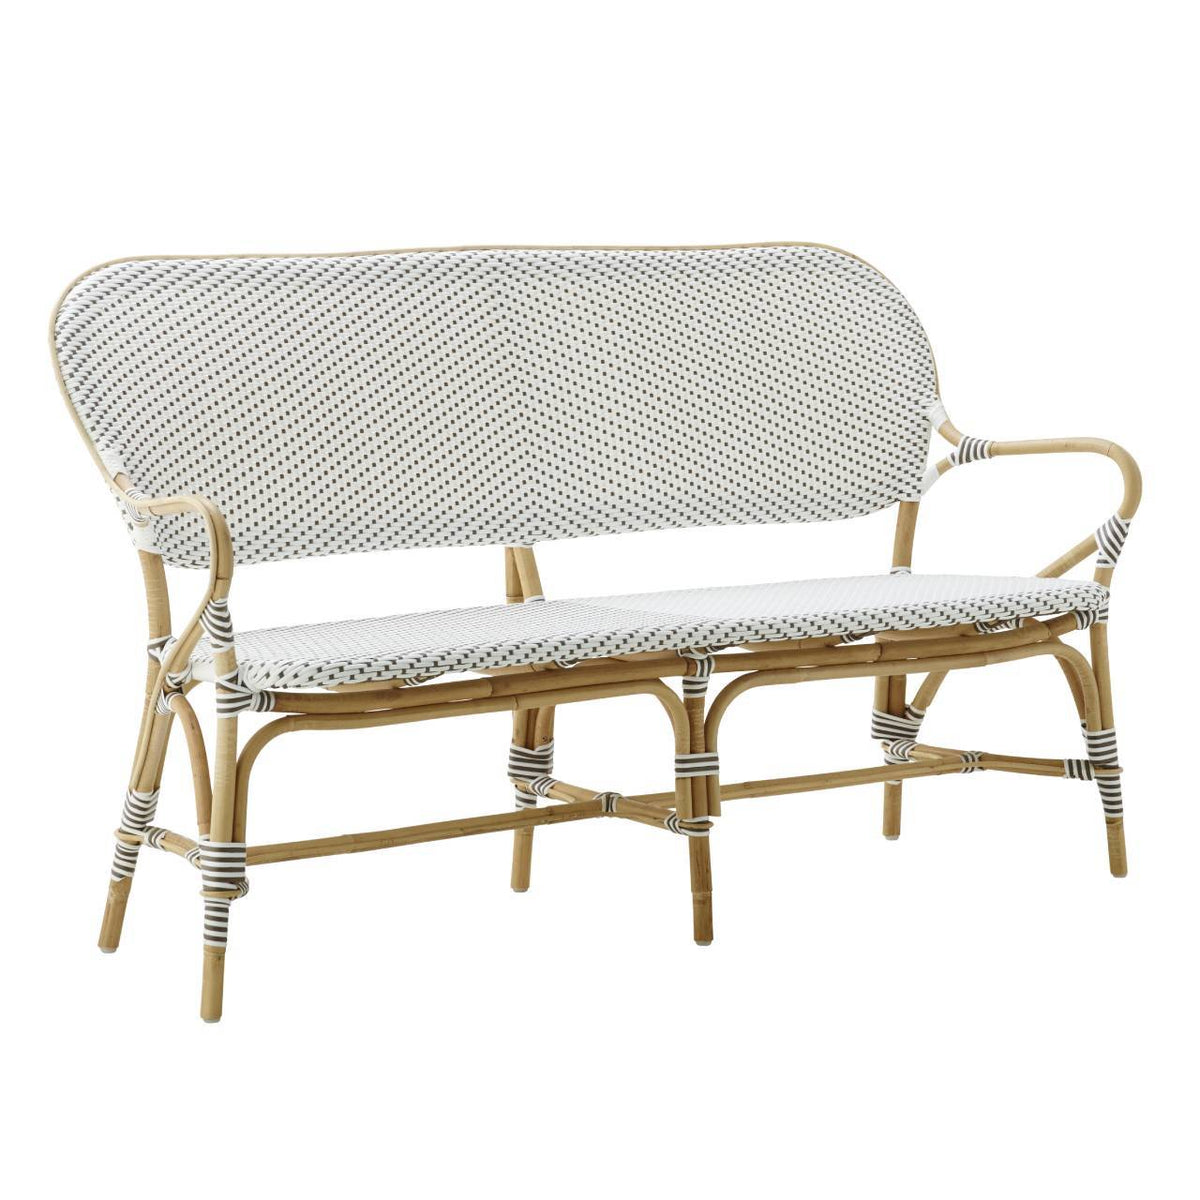 Banc Isabell de Sika